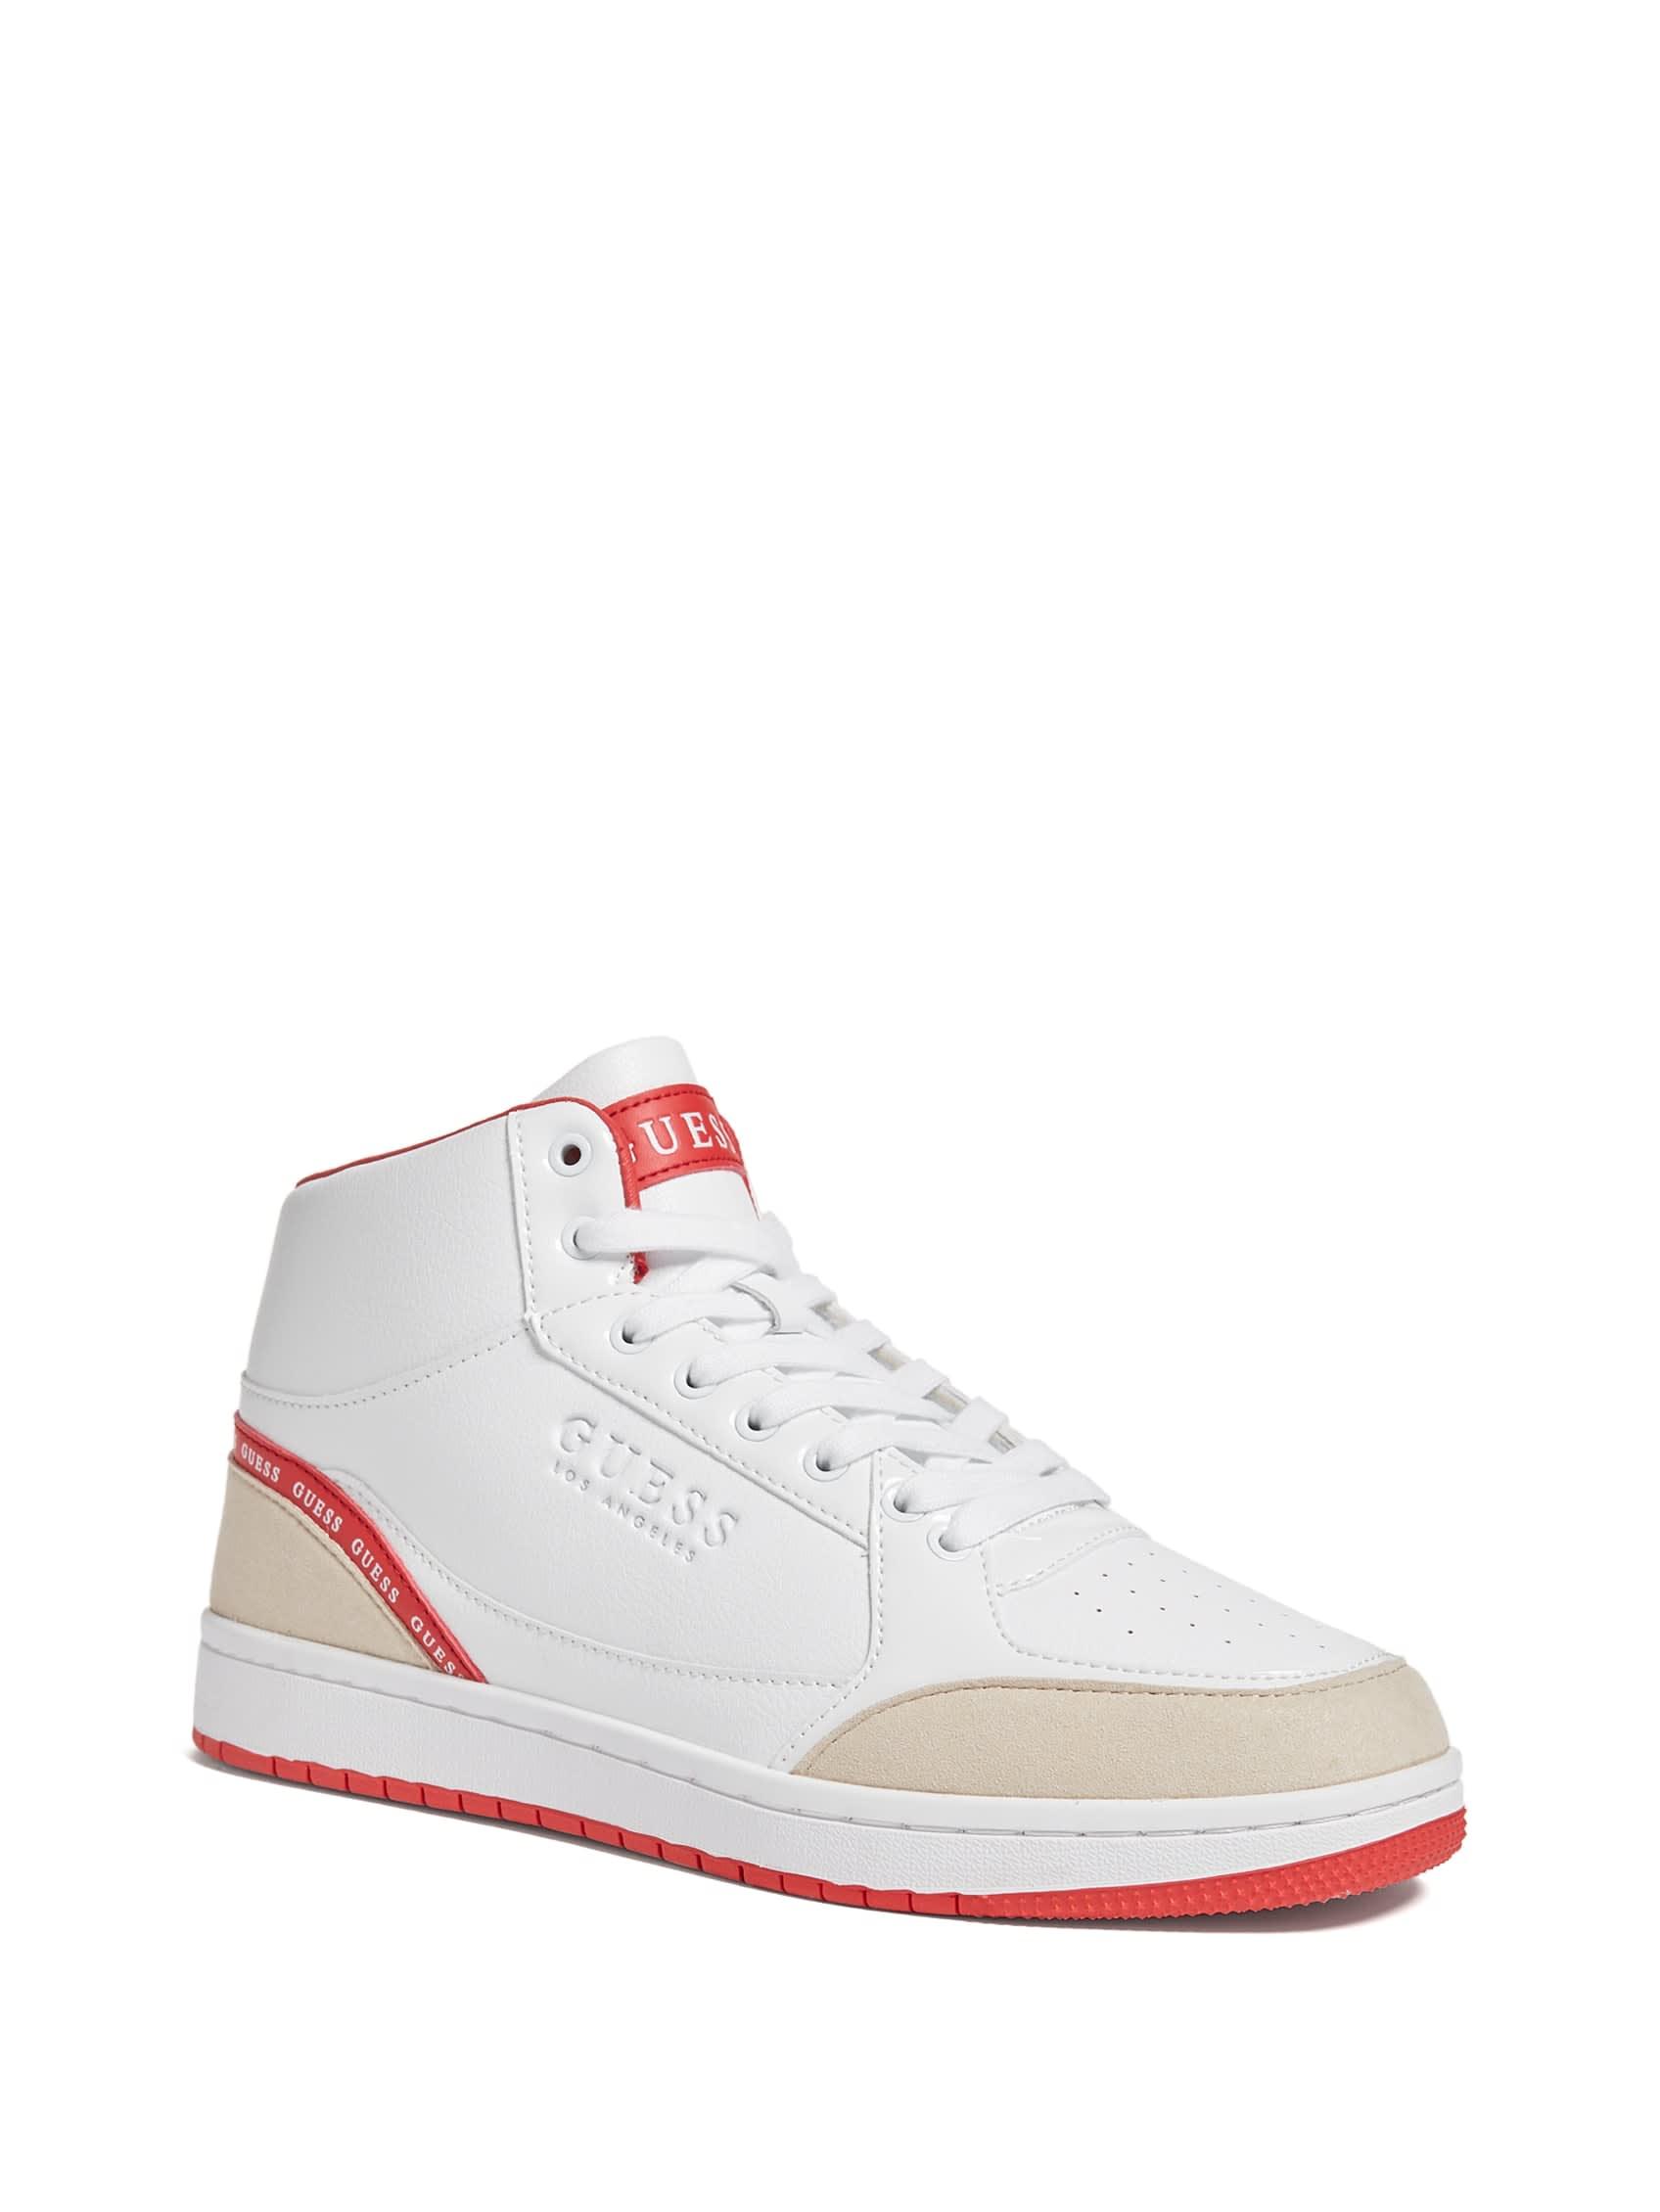 Guess Factory Marko High-top Sneakers in White for Men | Lyst